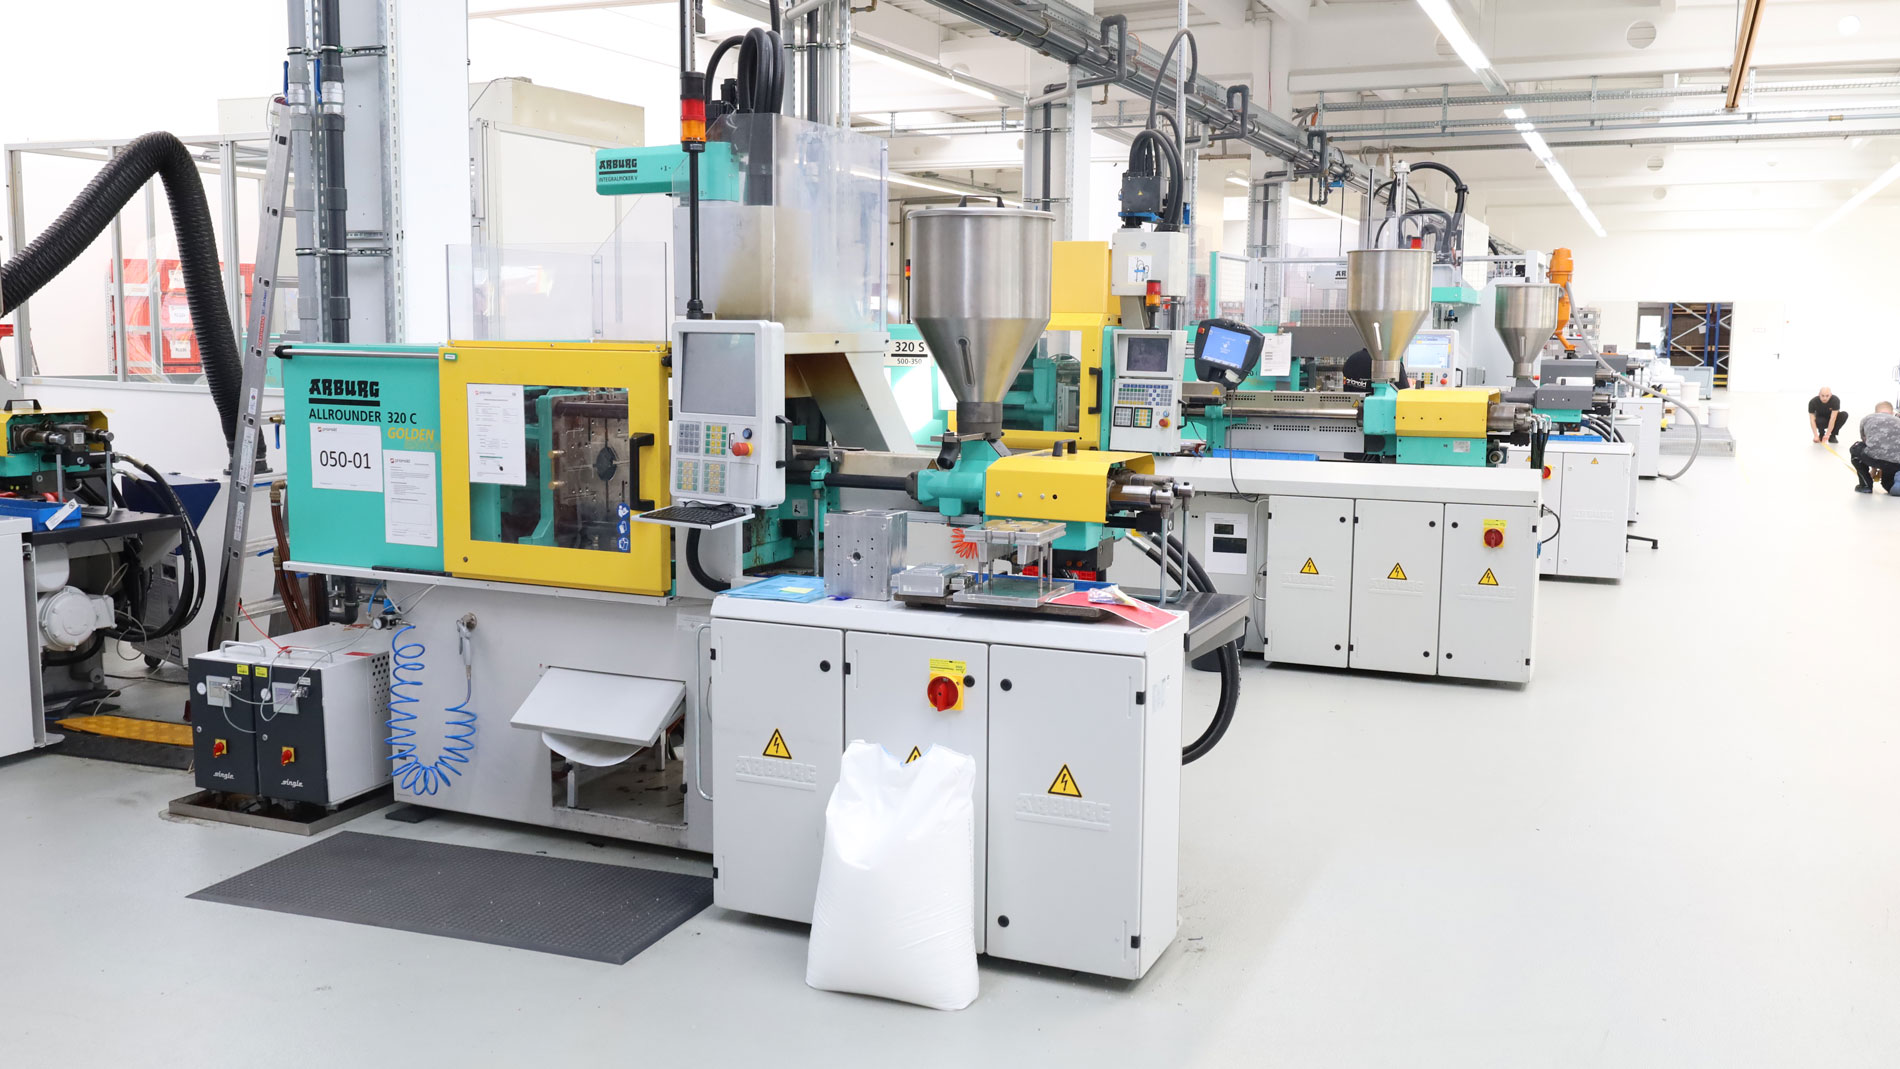 The core of Priomold's business: an array of injection molding machines producing prototypes and small series